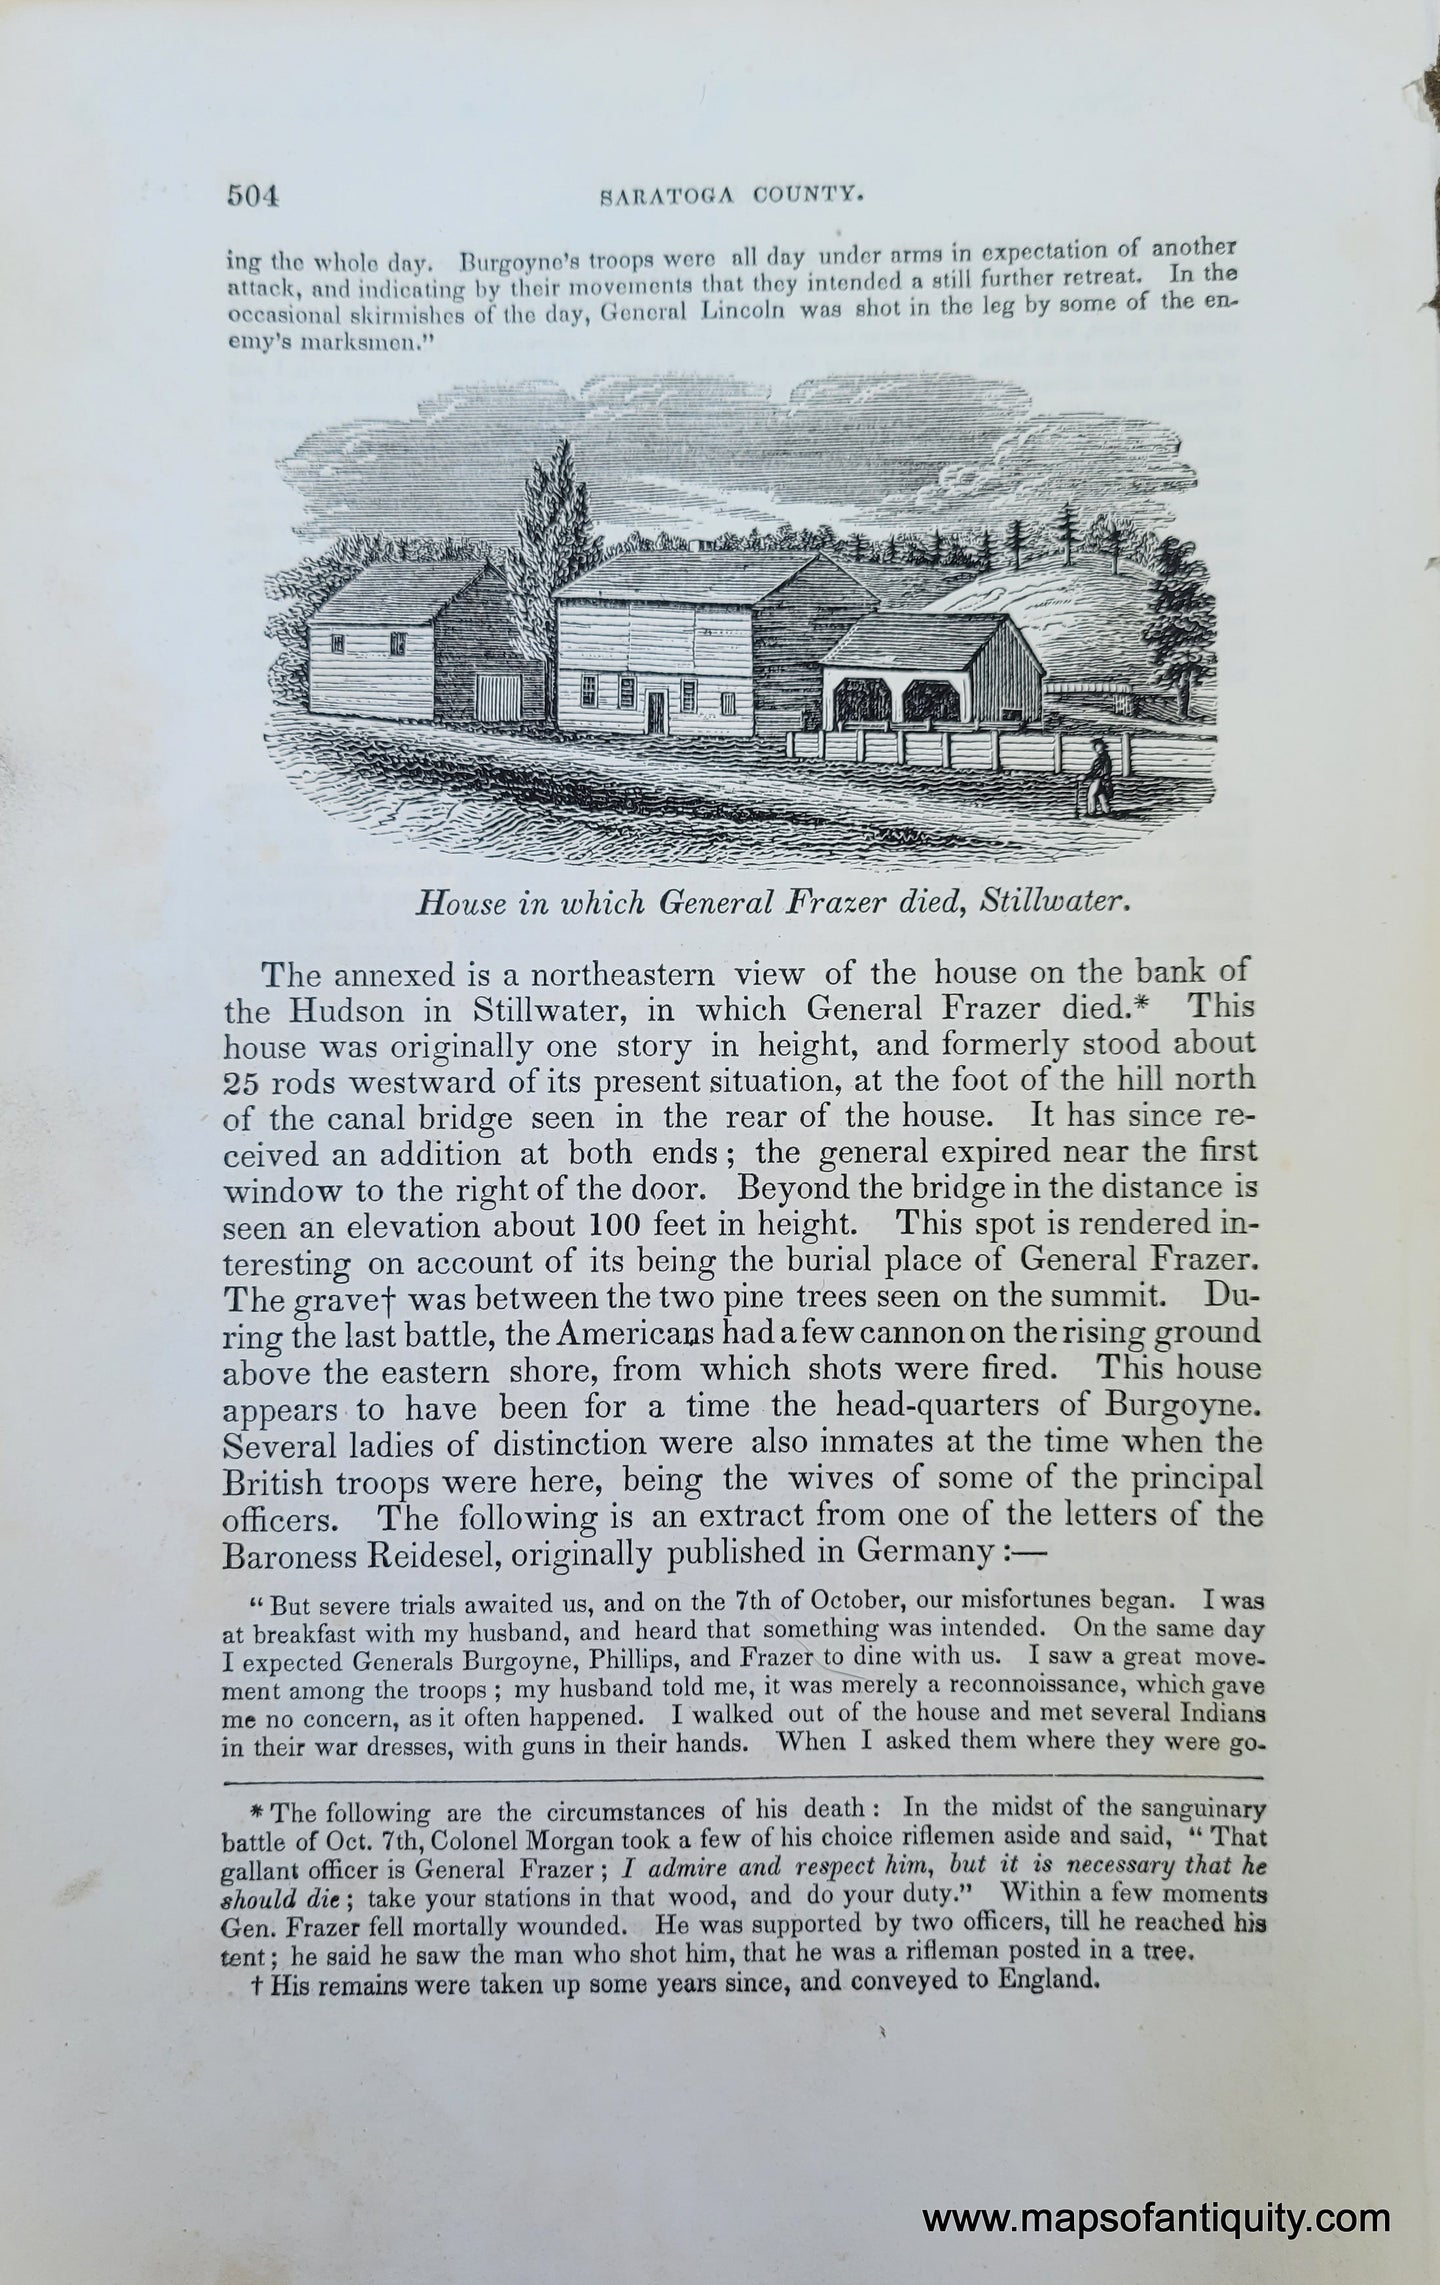 Genuine-Antique-Illustration-House-in-which-General-Frazer-died,-Stillwater-(NY)-1841-Barber-Maps-Of-Antiquity